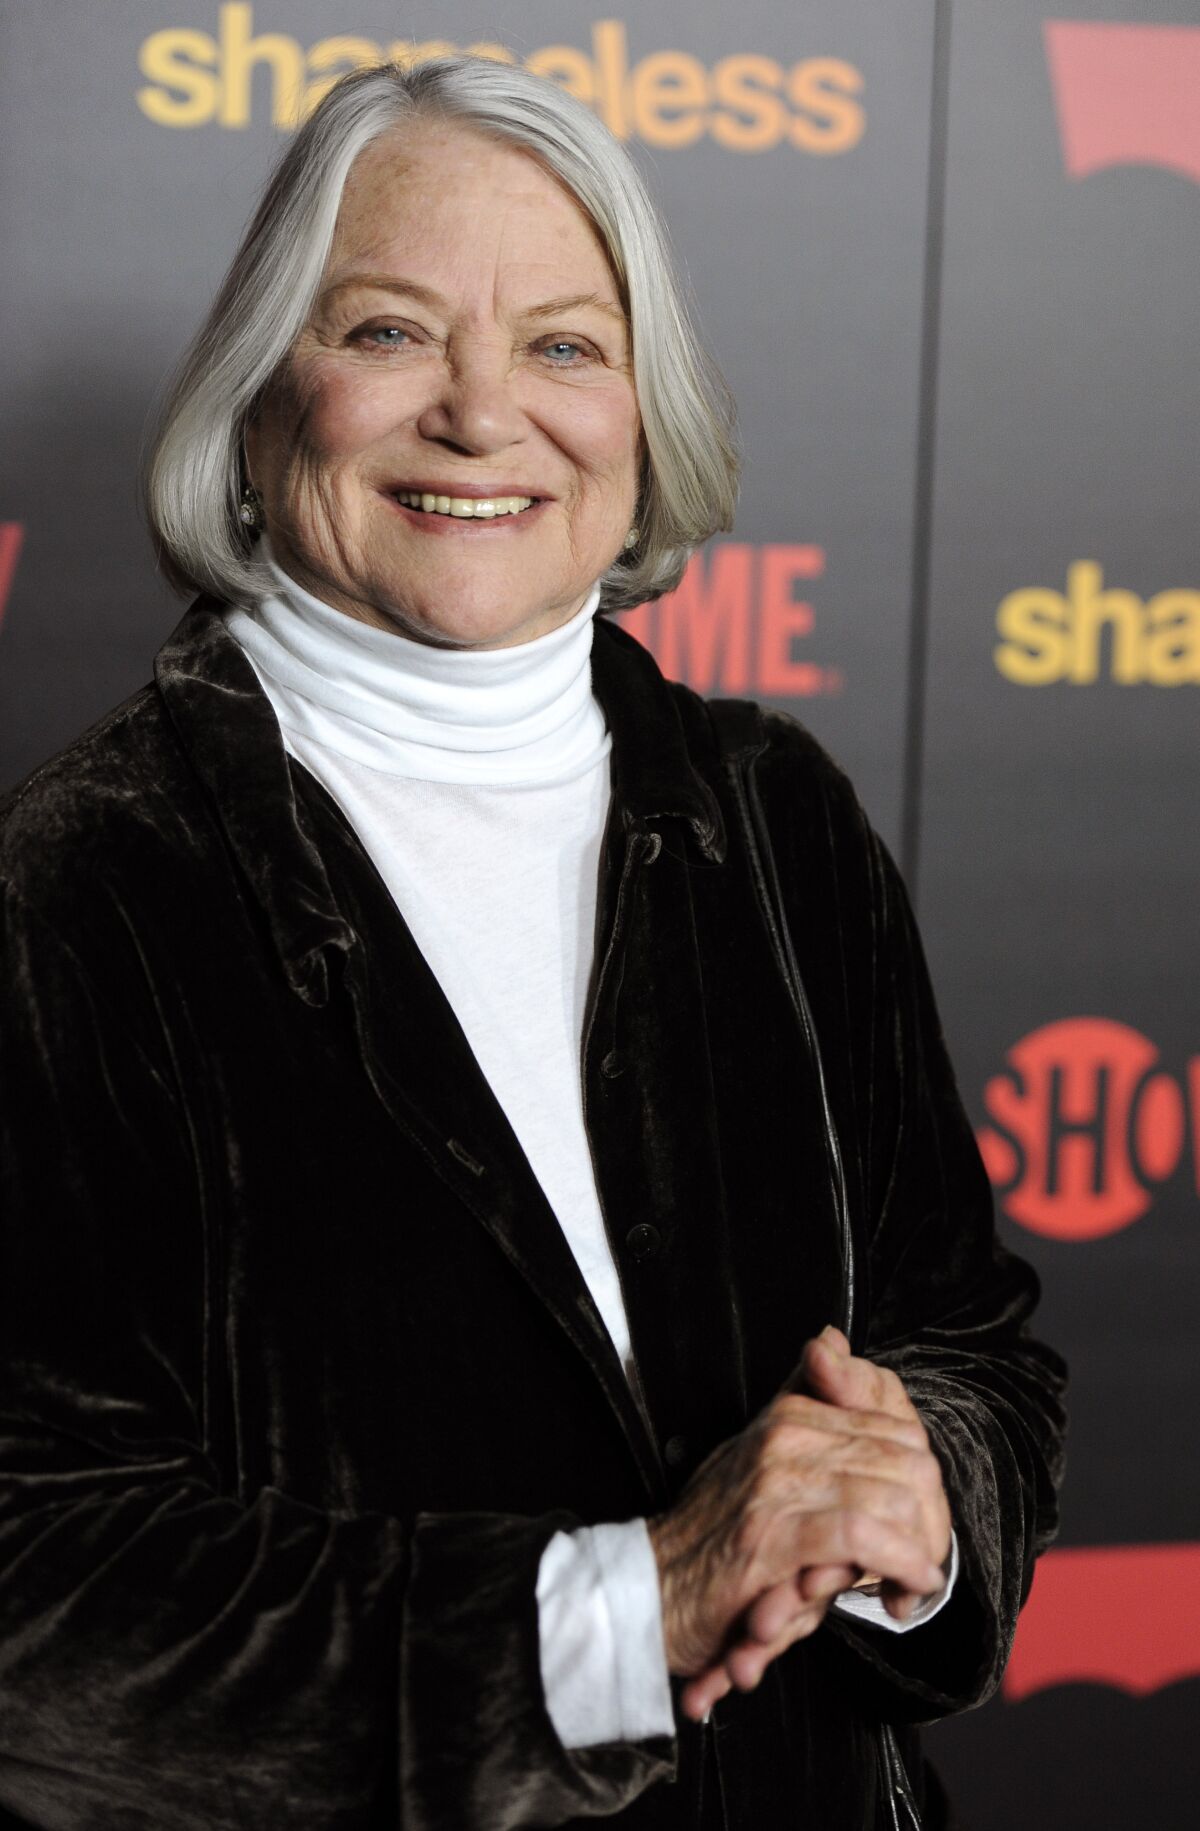 A woman with a gray bob, wearing a white turtleneck and a black jacket smiles